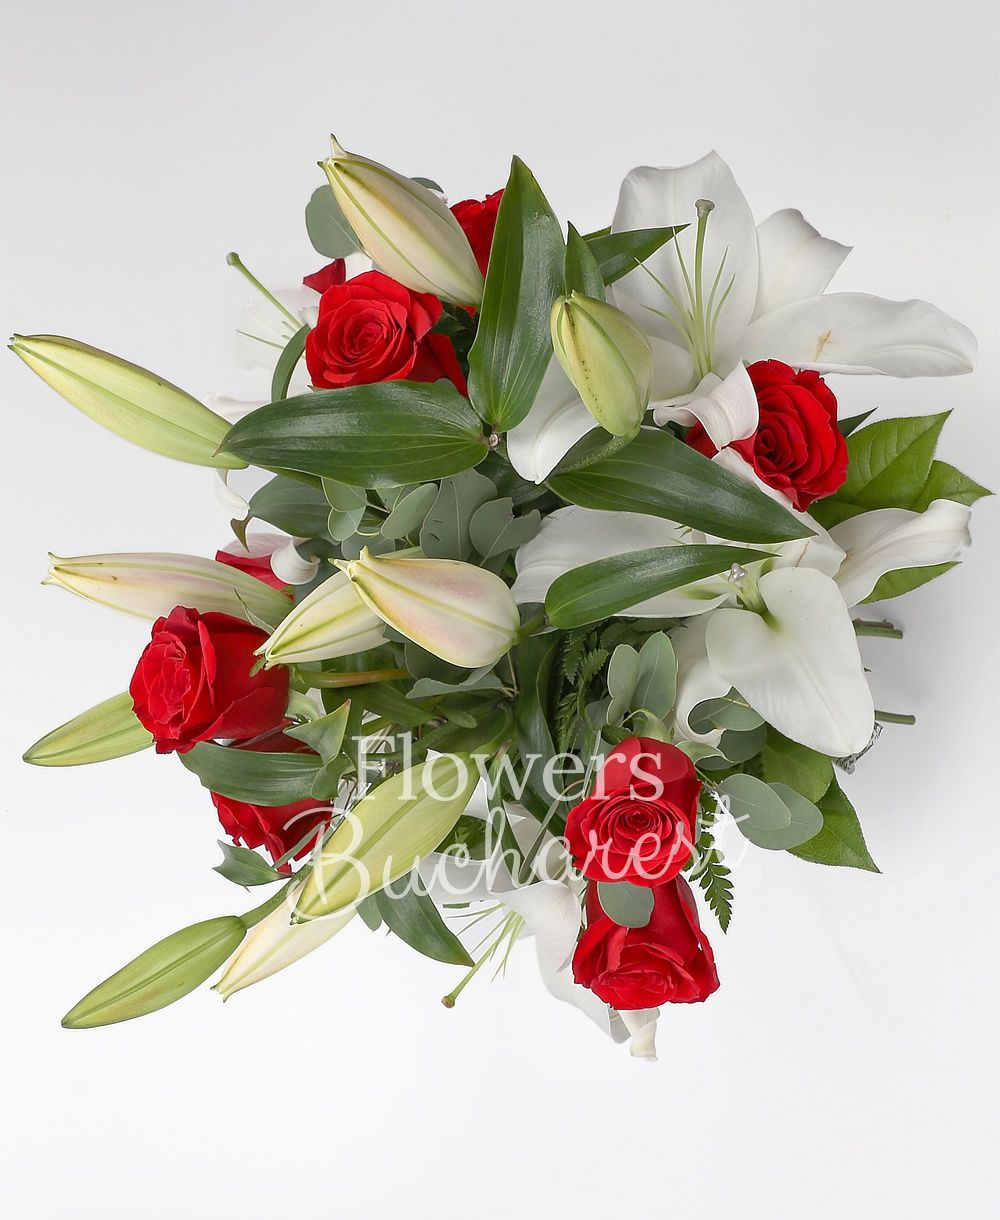 11 red roses, 4 white lilies, greenery